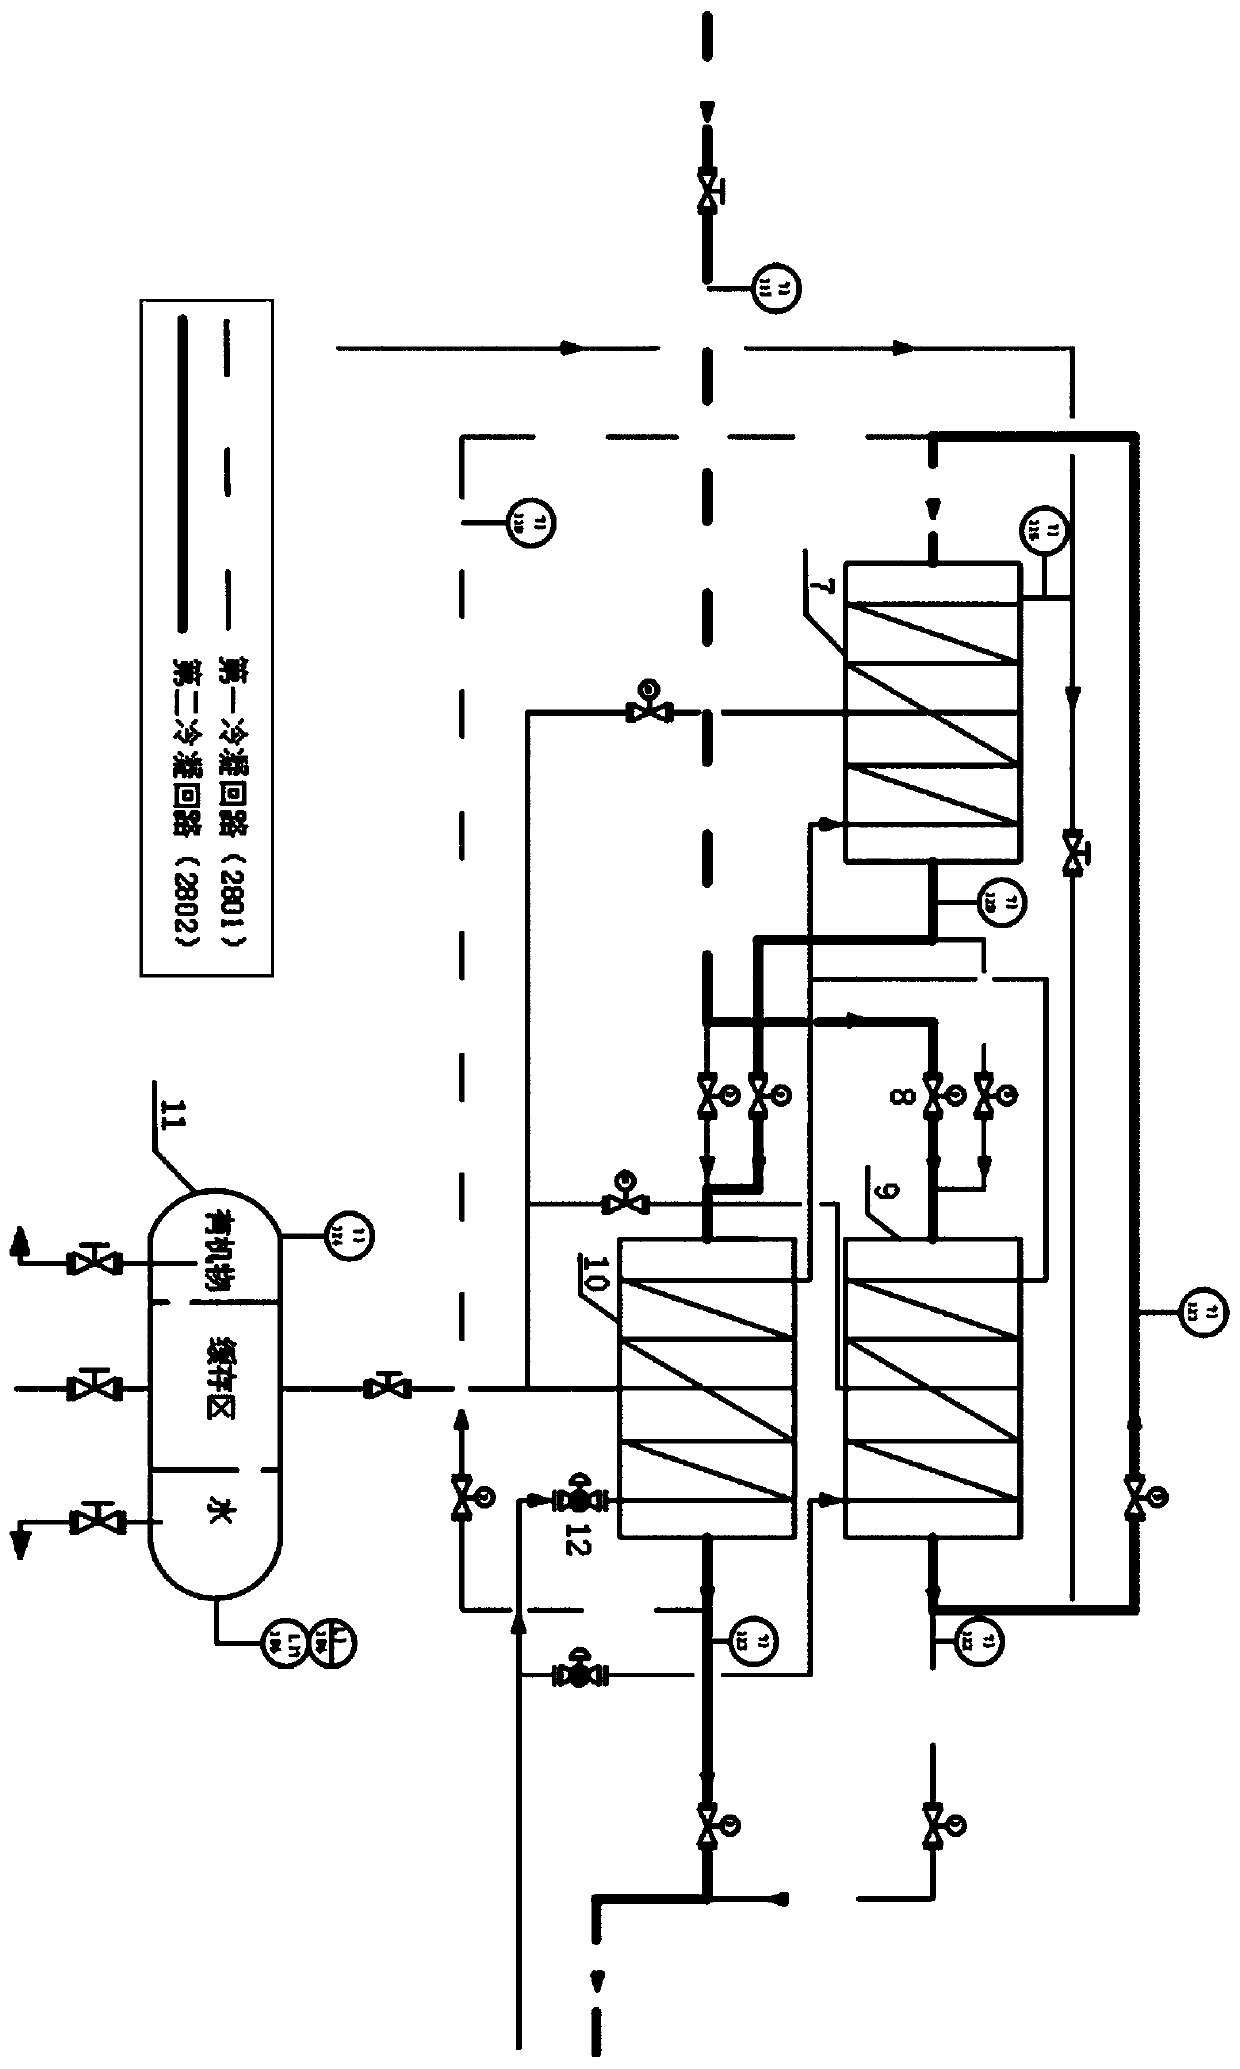 Absorption, desorption and recovery integrated VOCs recovery system and absorption, desorption and recovery integrated VOCs recovery method